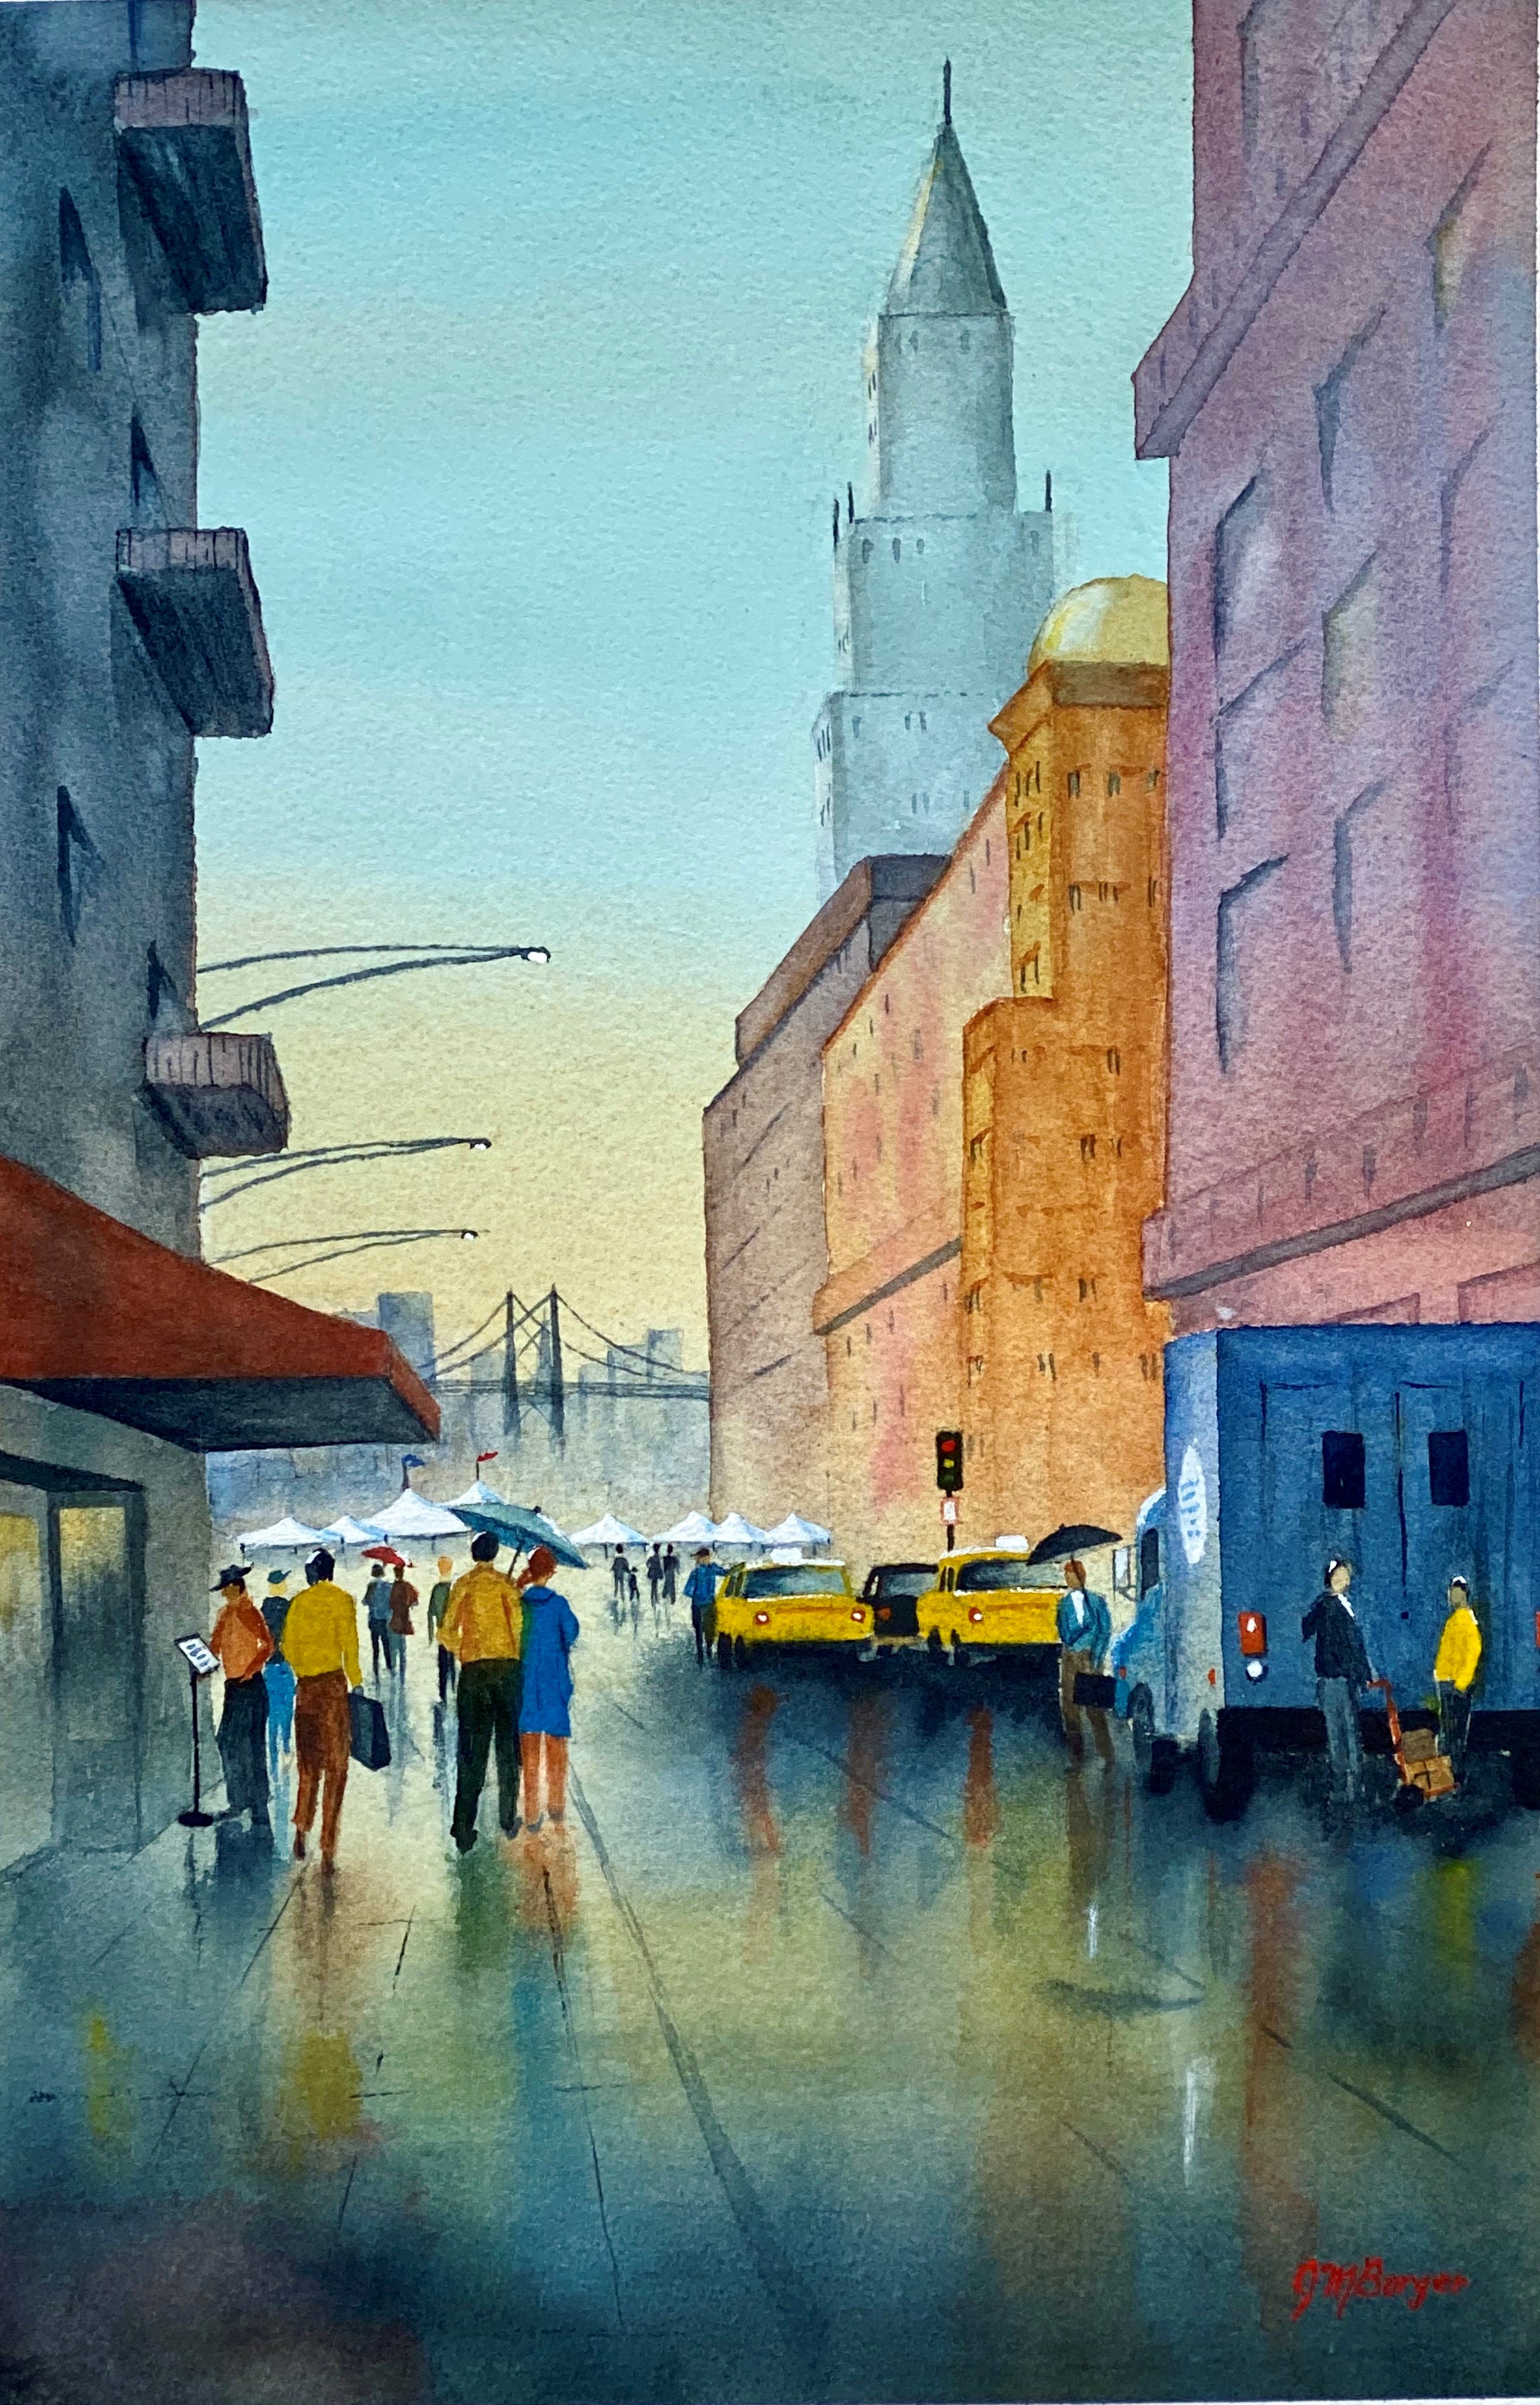 11th - Best in Show & Artists' Choice, Joe Burger, What's Goin' On, Watercolors